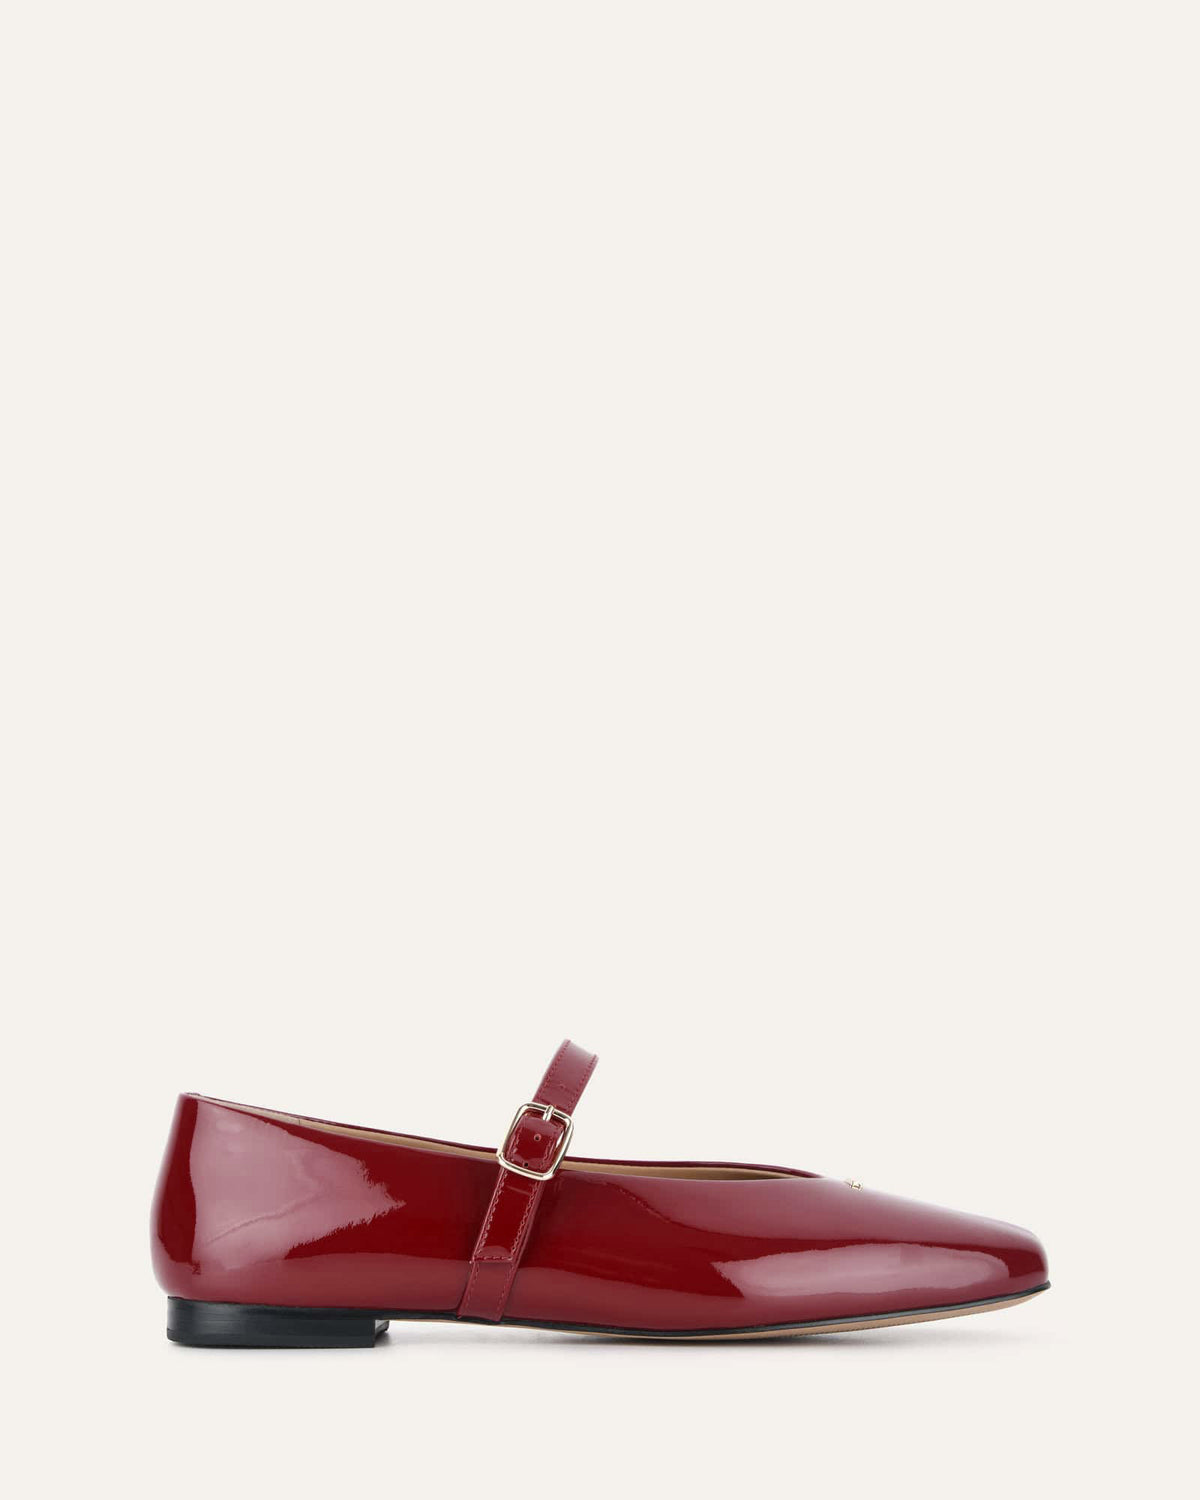 APRIL CASUAL FLATS RUBY RED PATENT